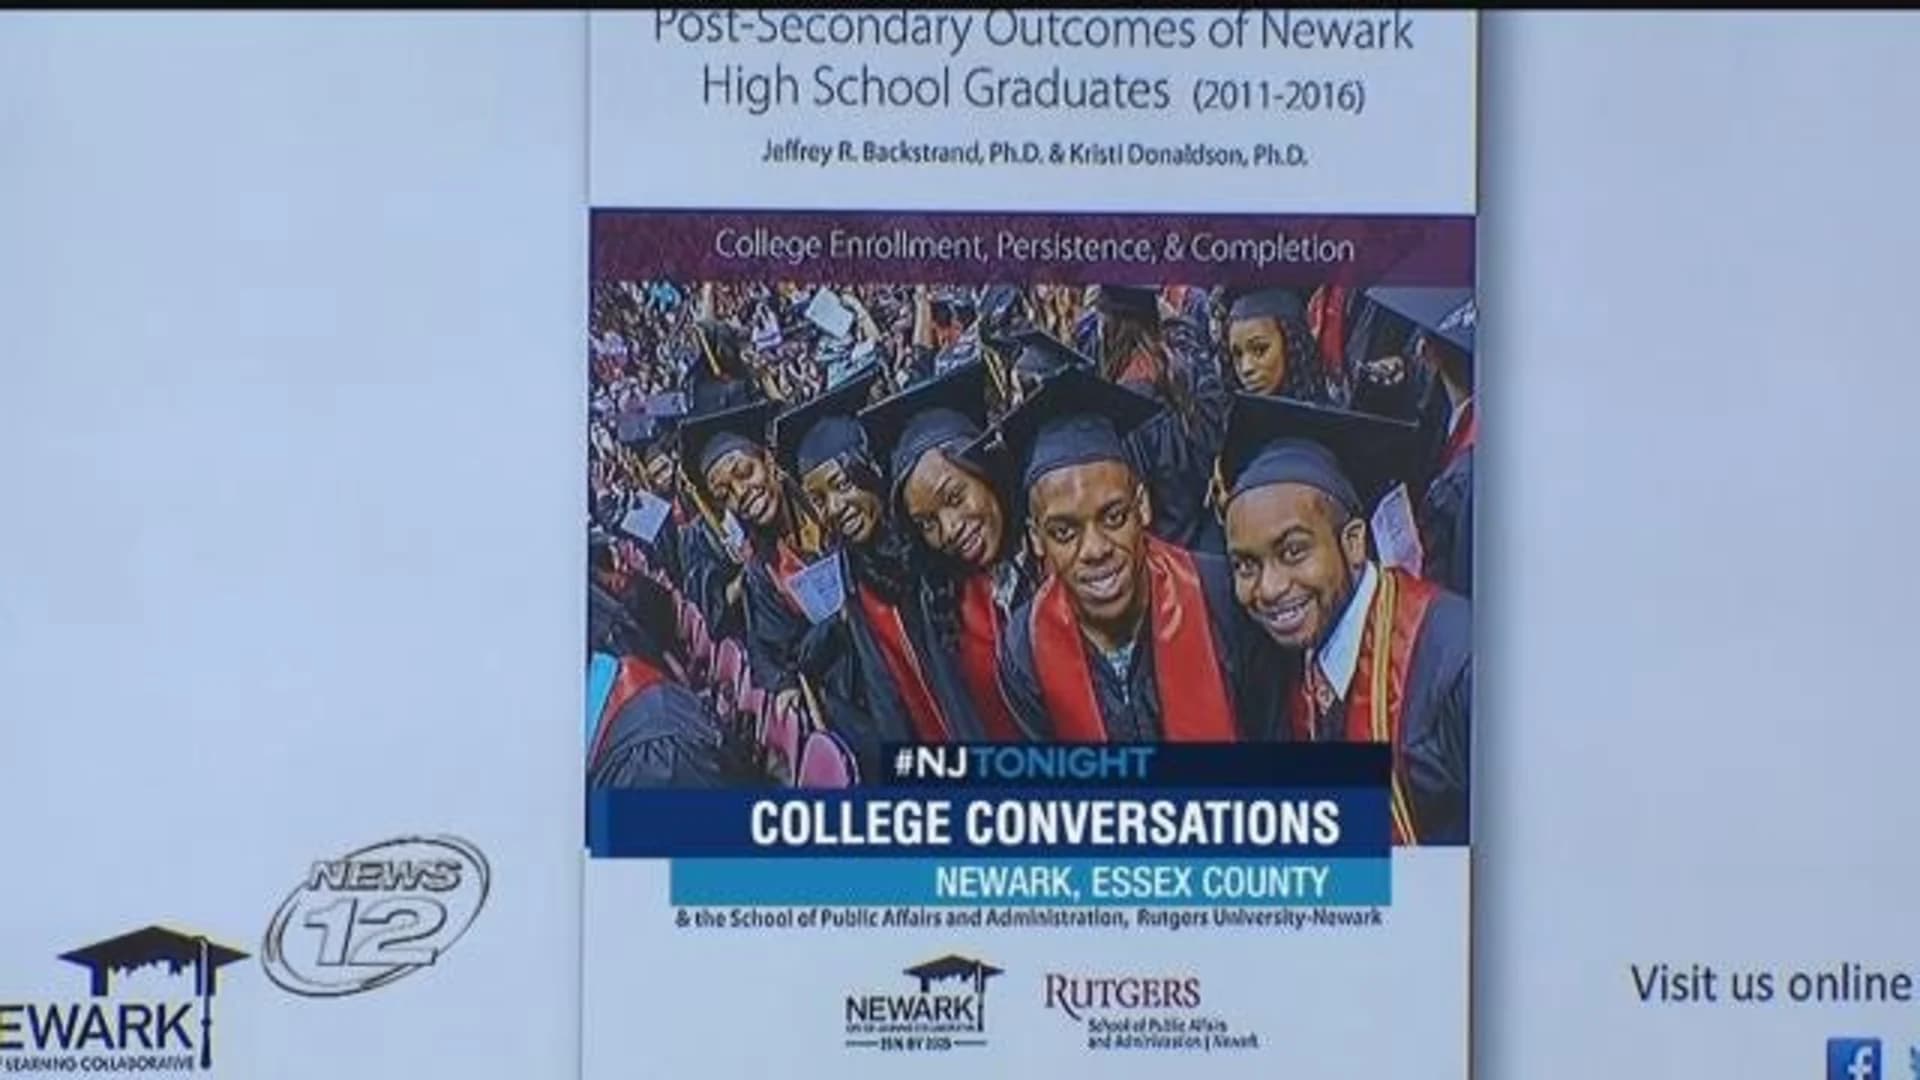 Newark launches initiative to get more students interested in college